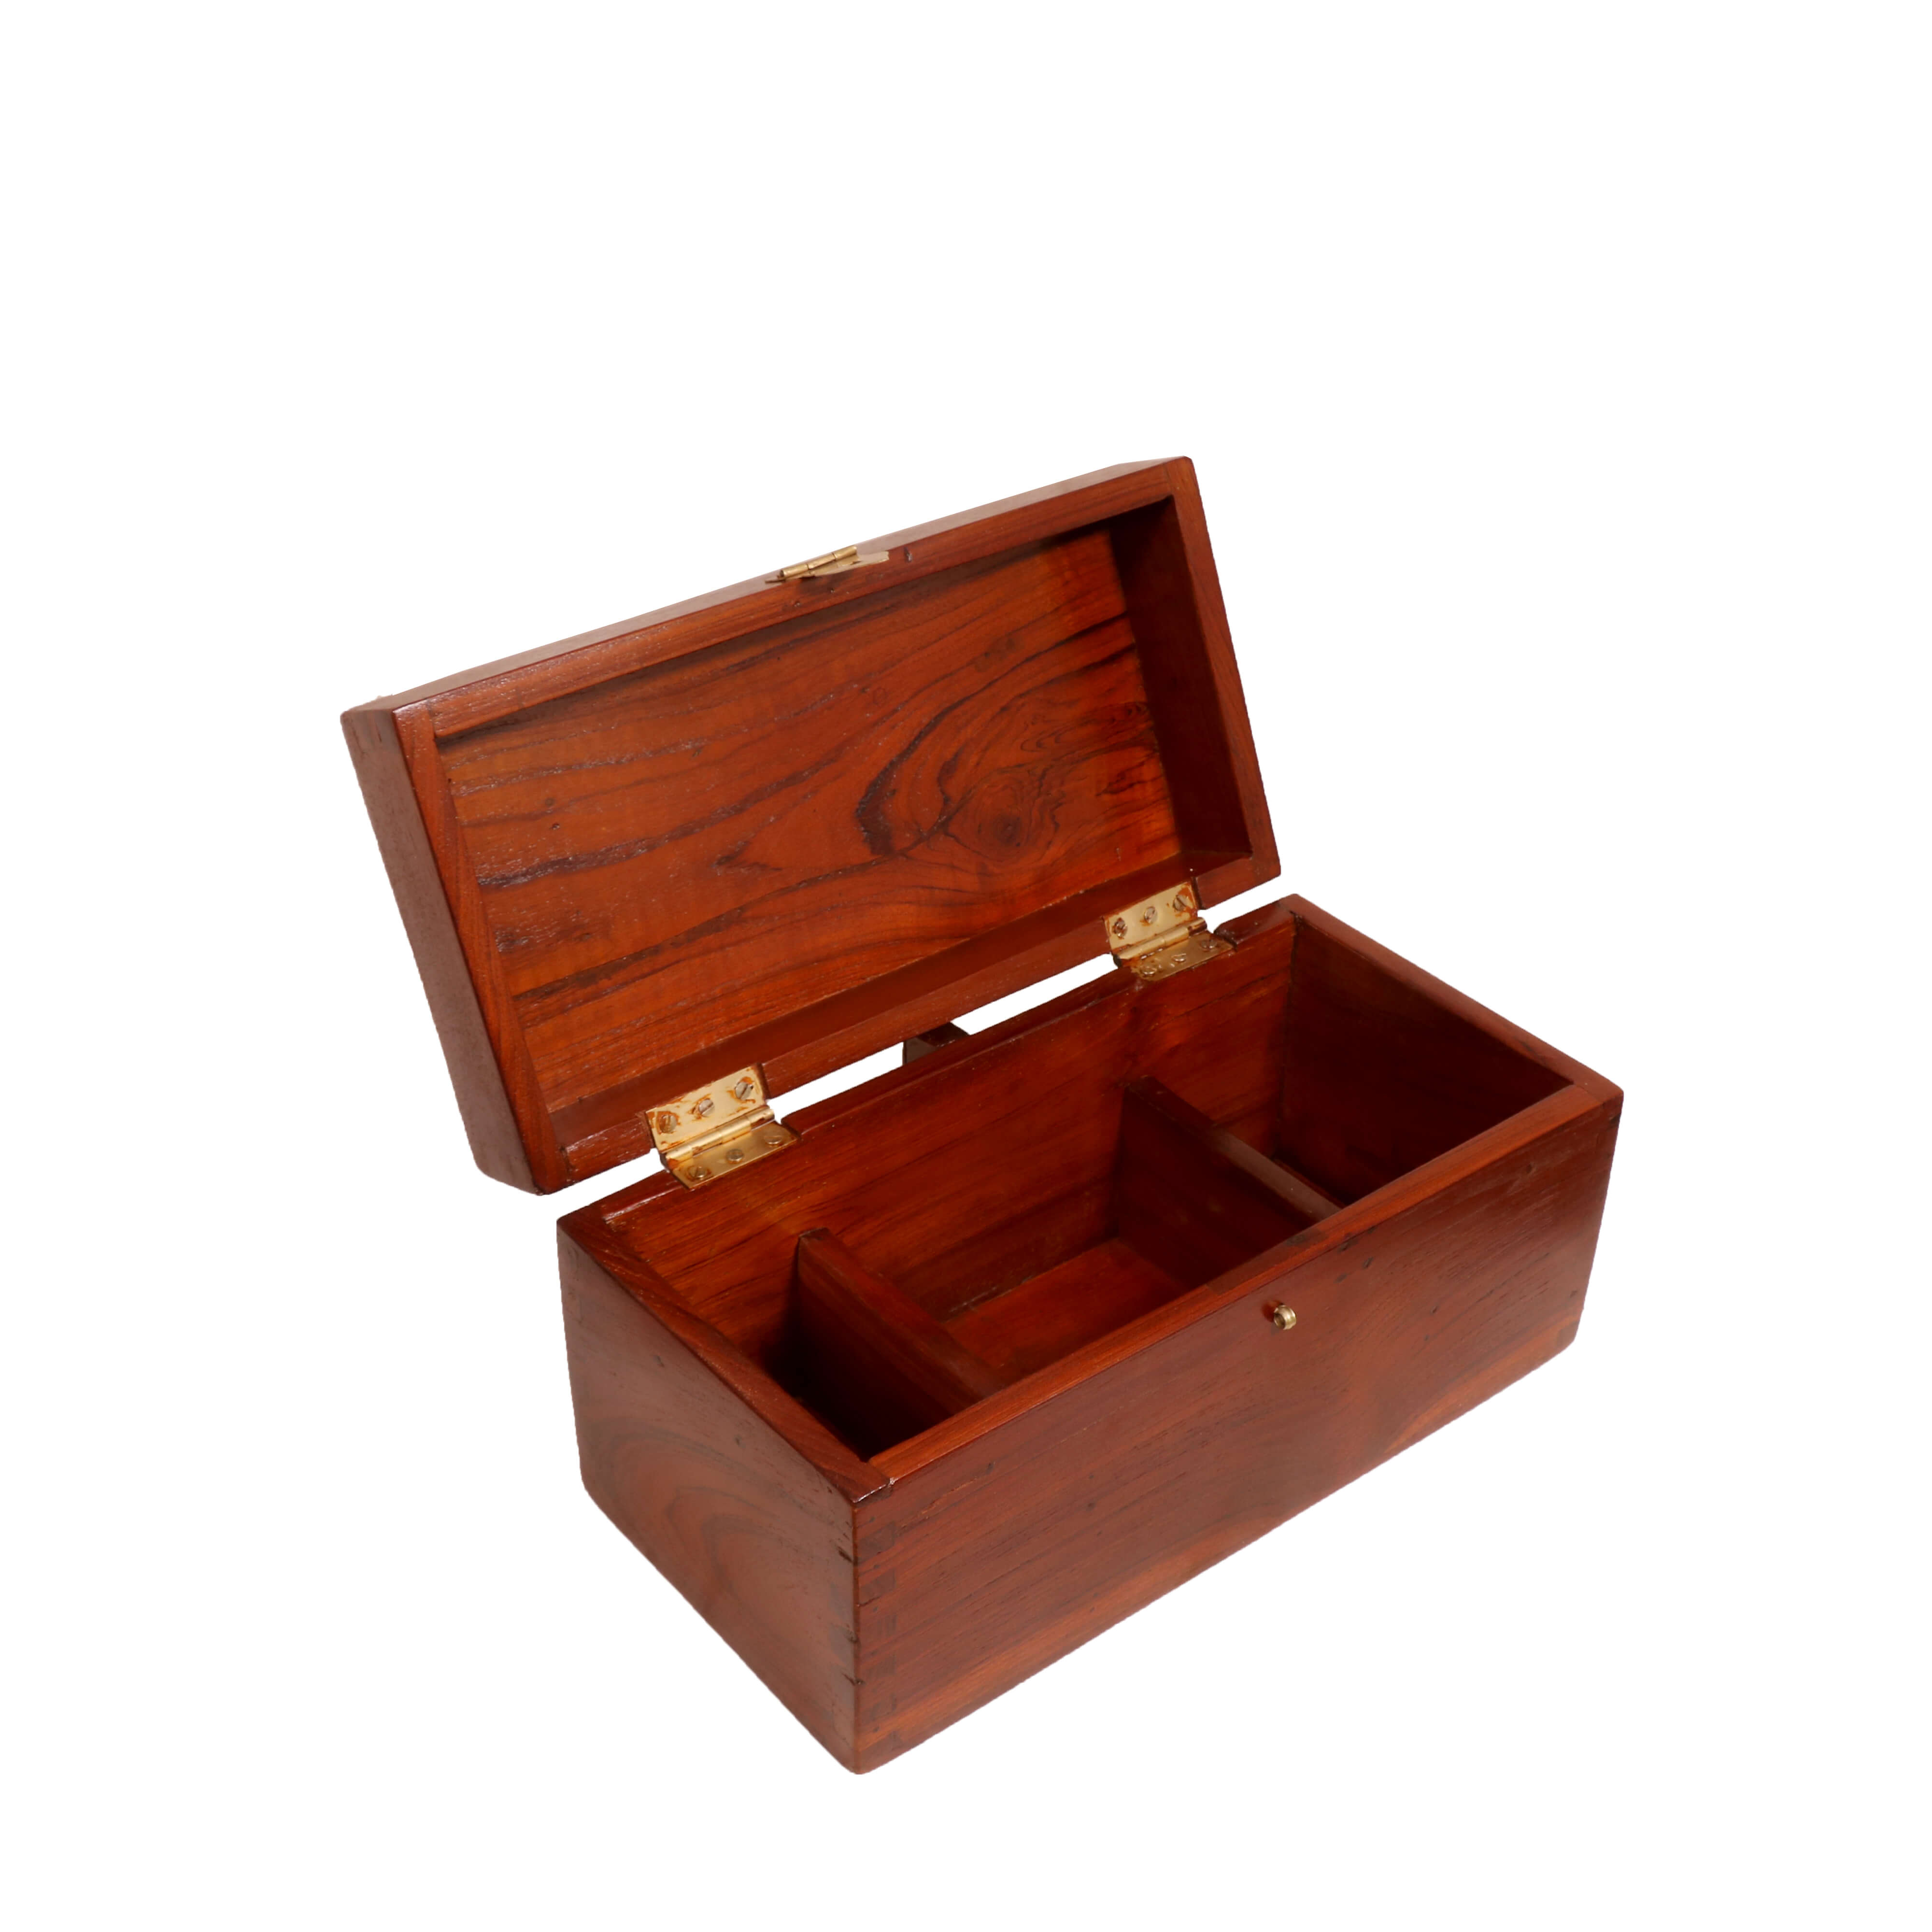 3-Compartment Wooden Box Wooden Box